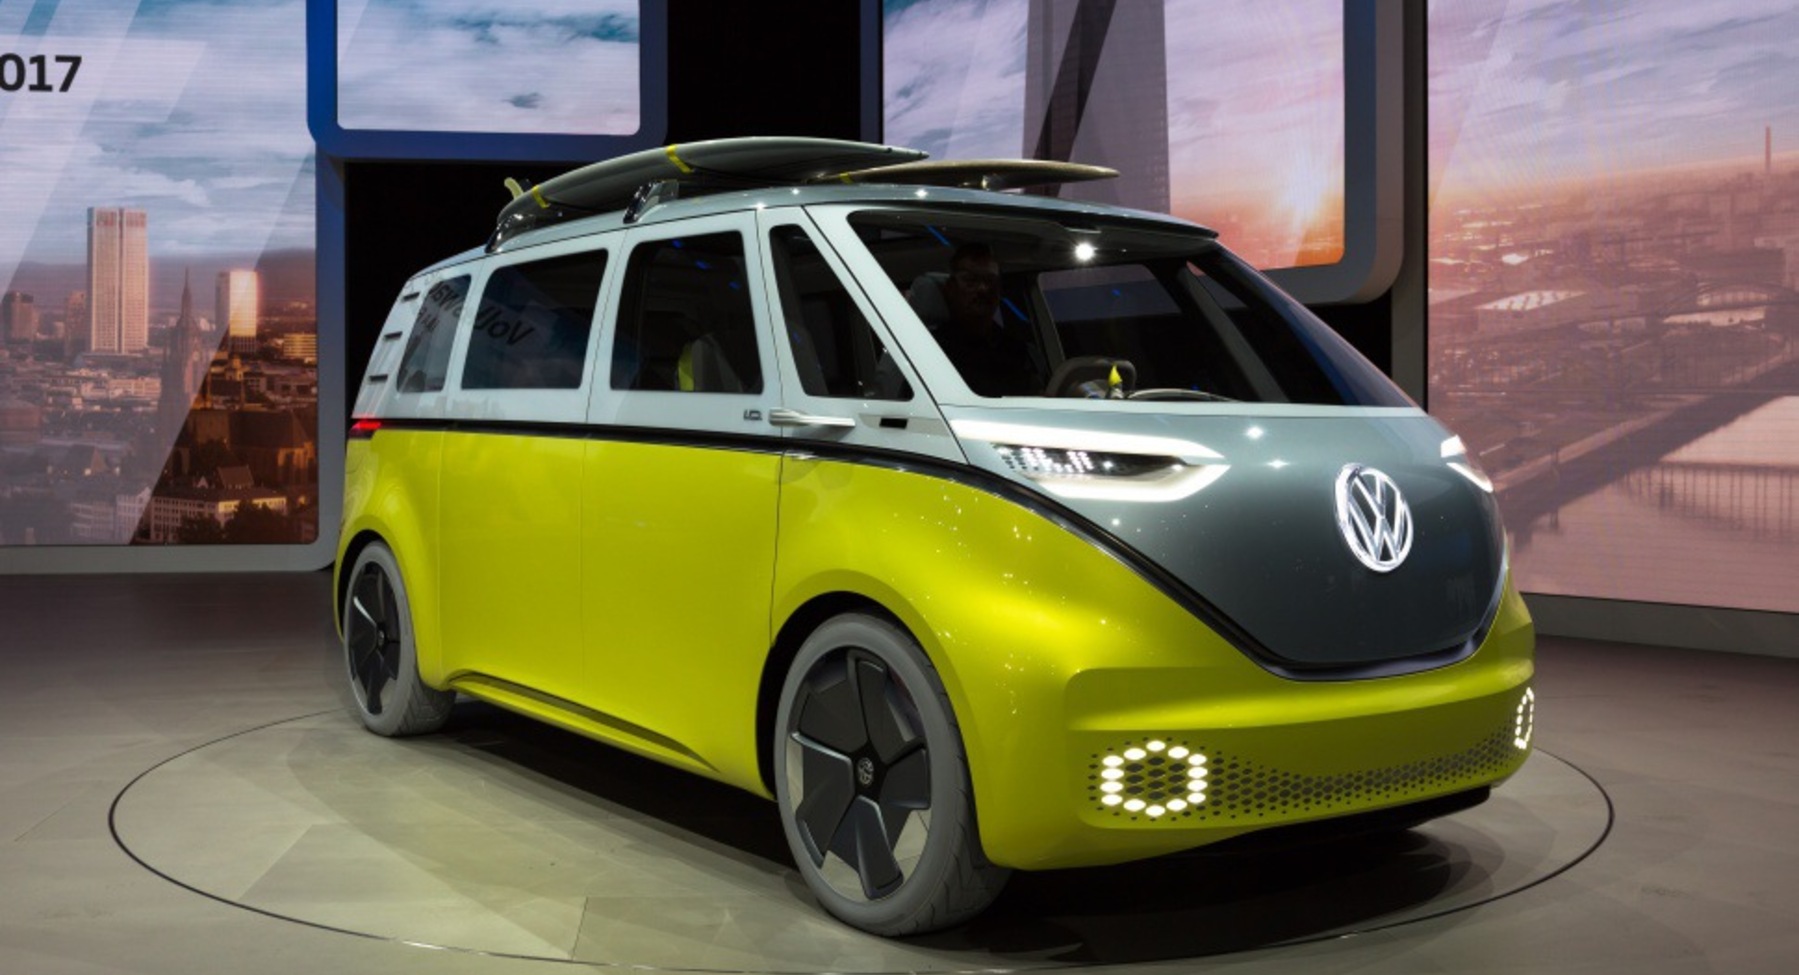 Volkswagen ID. BUZZ Concept 111 kWh (374 Hp) AWD 2017